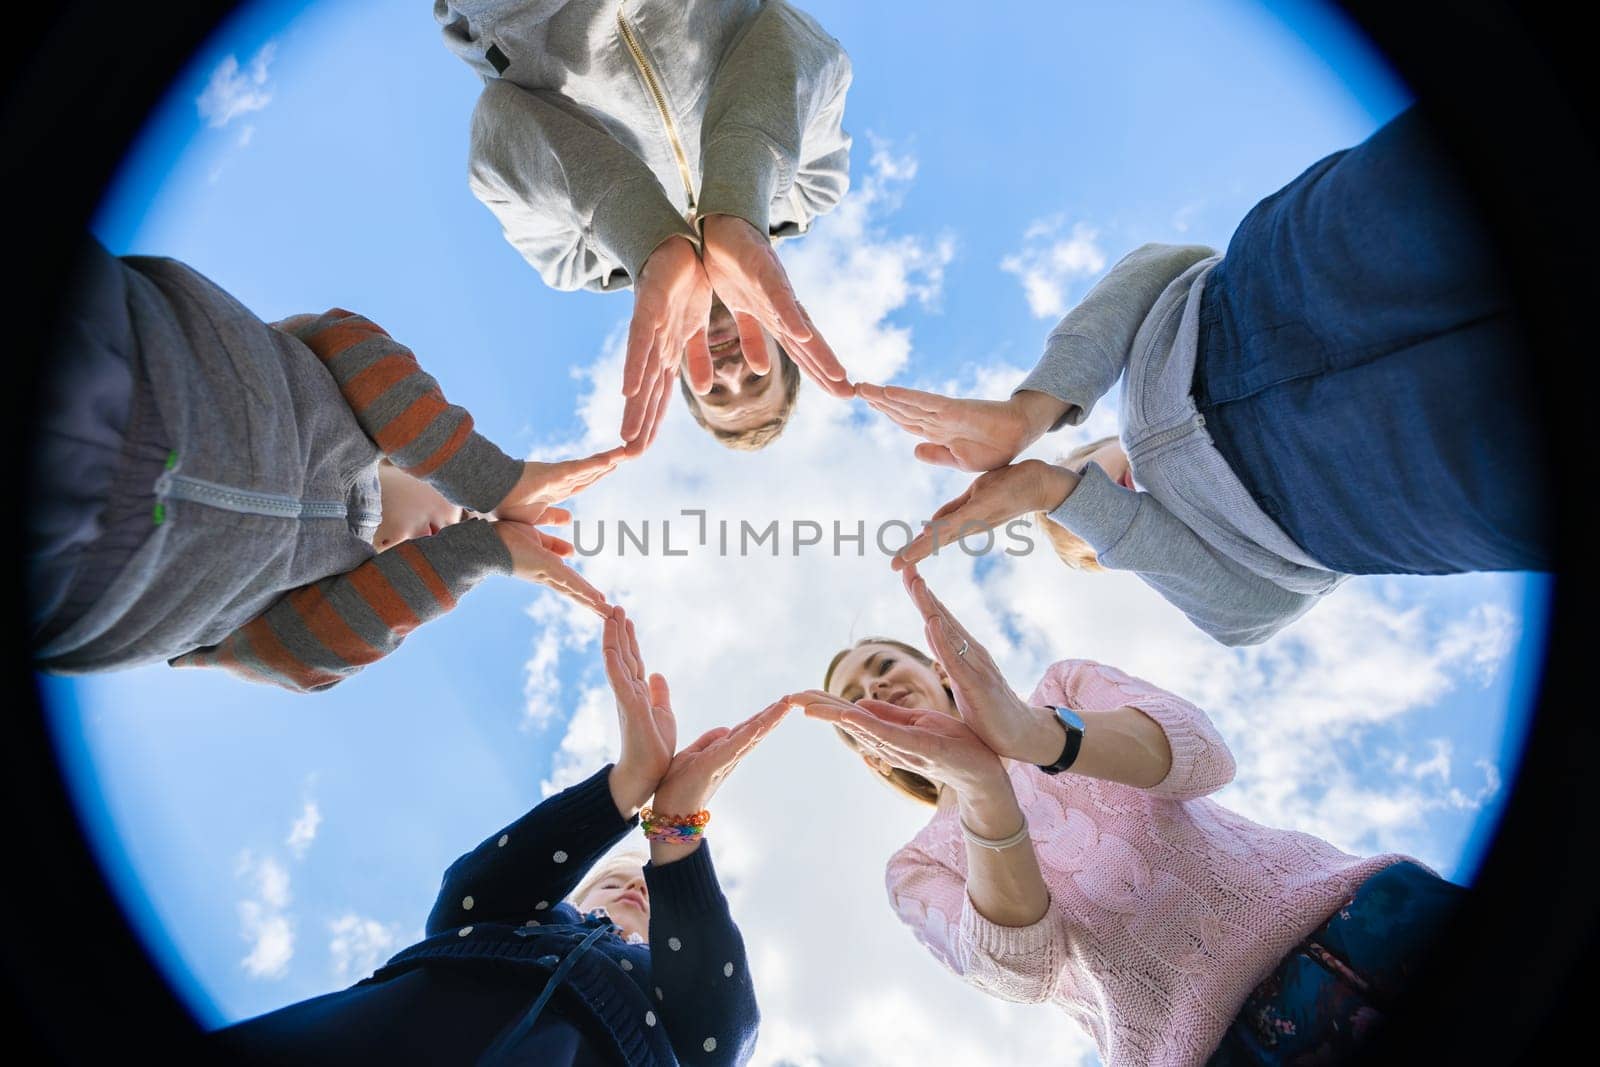 A friendly family makes a star shape out of their hands